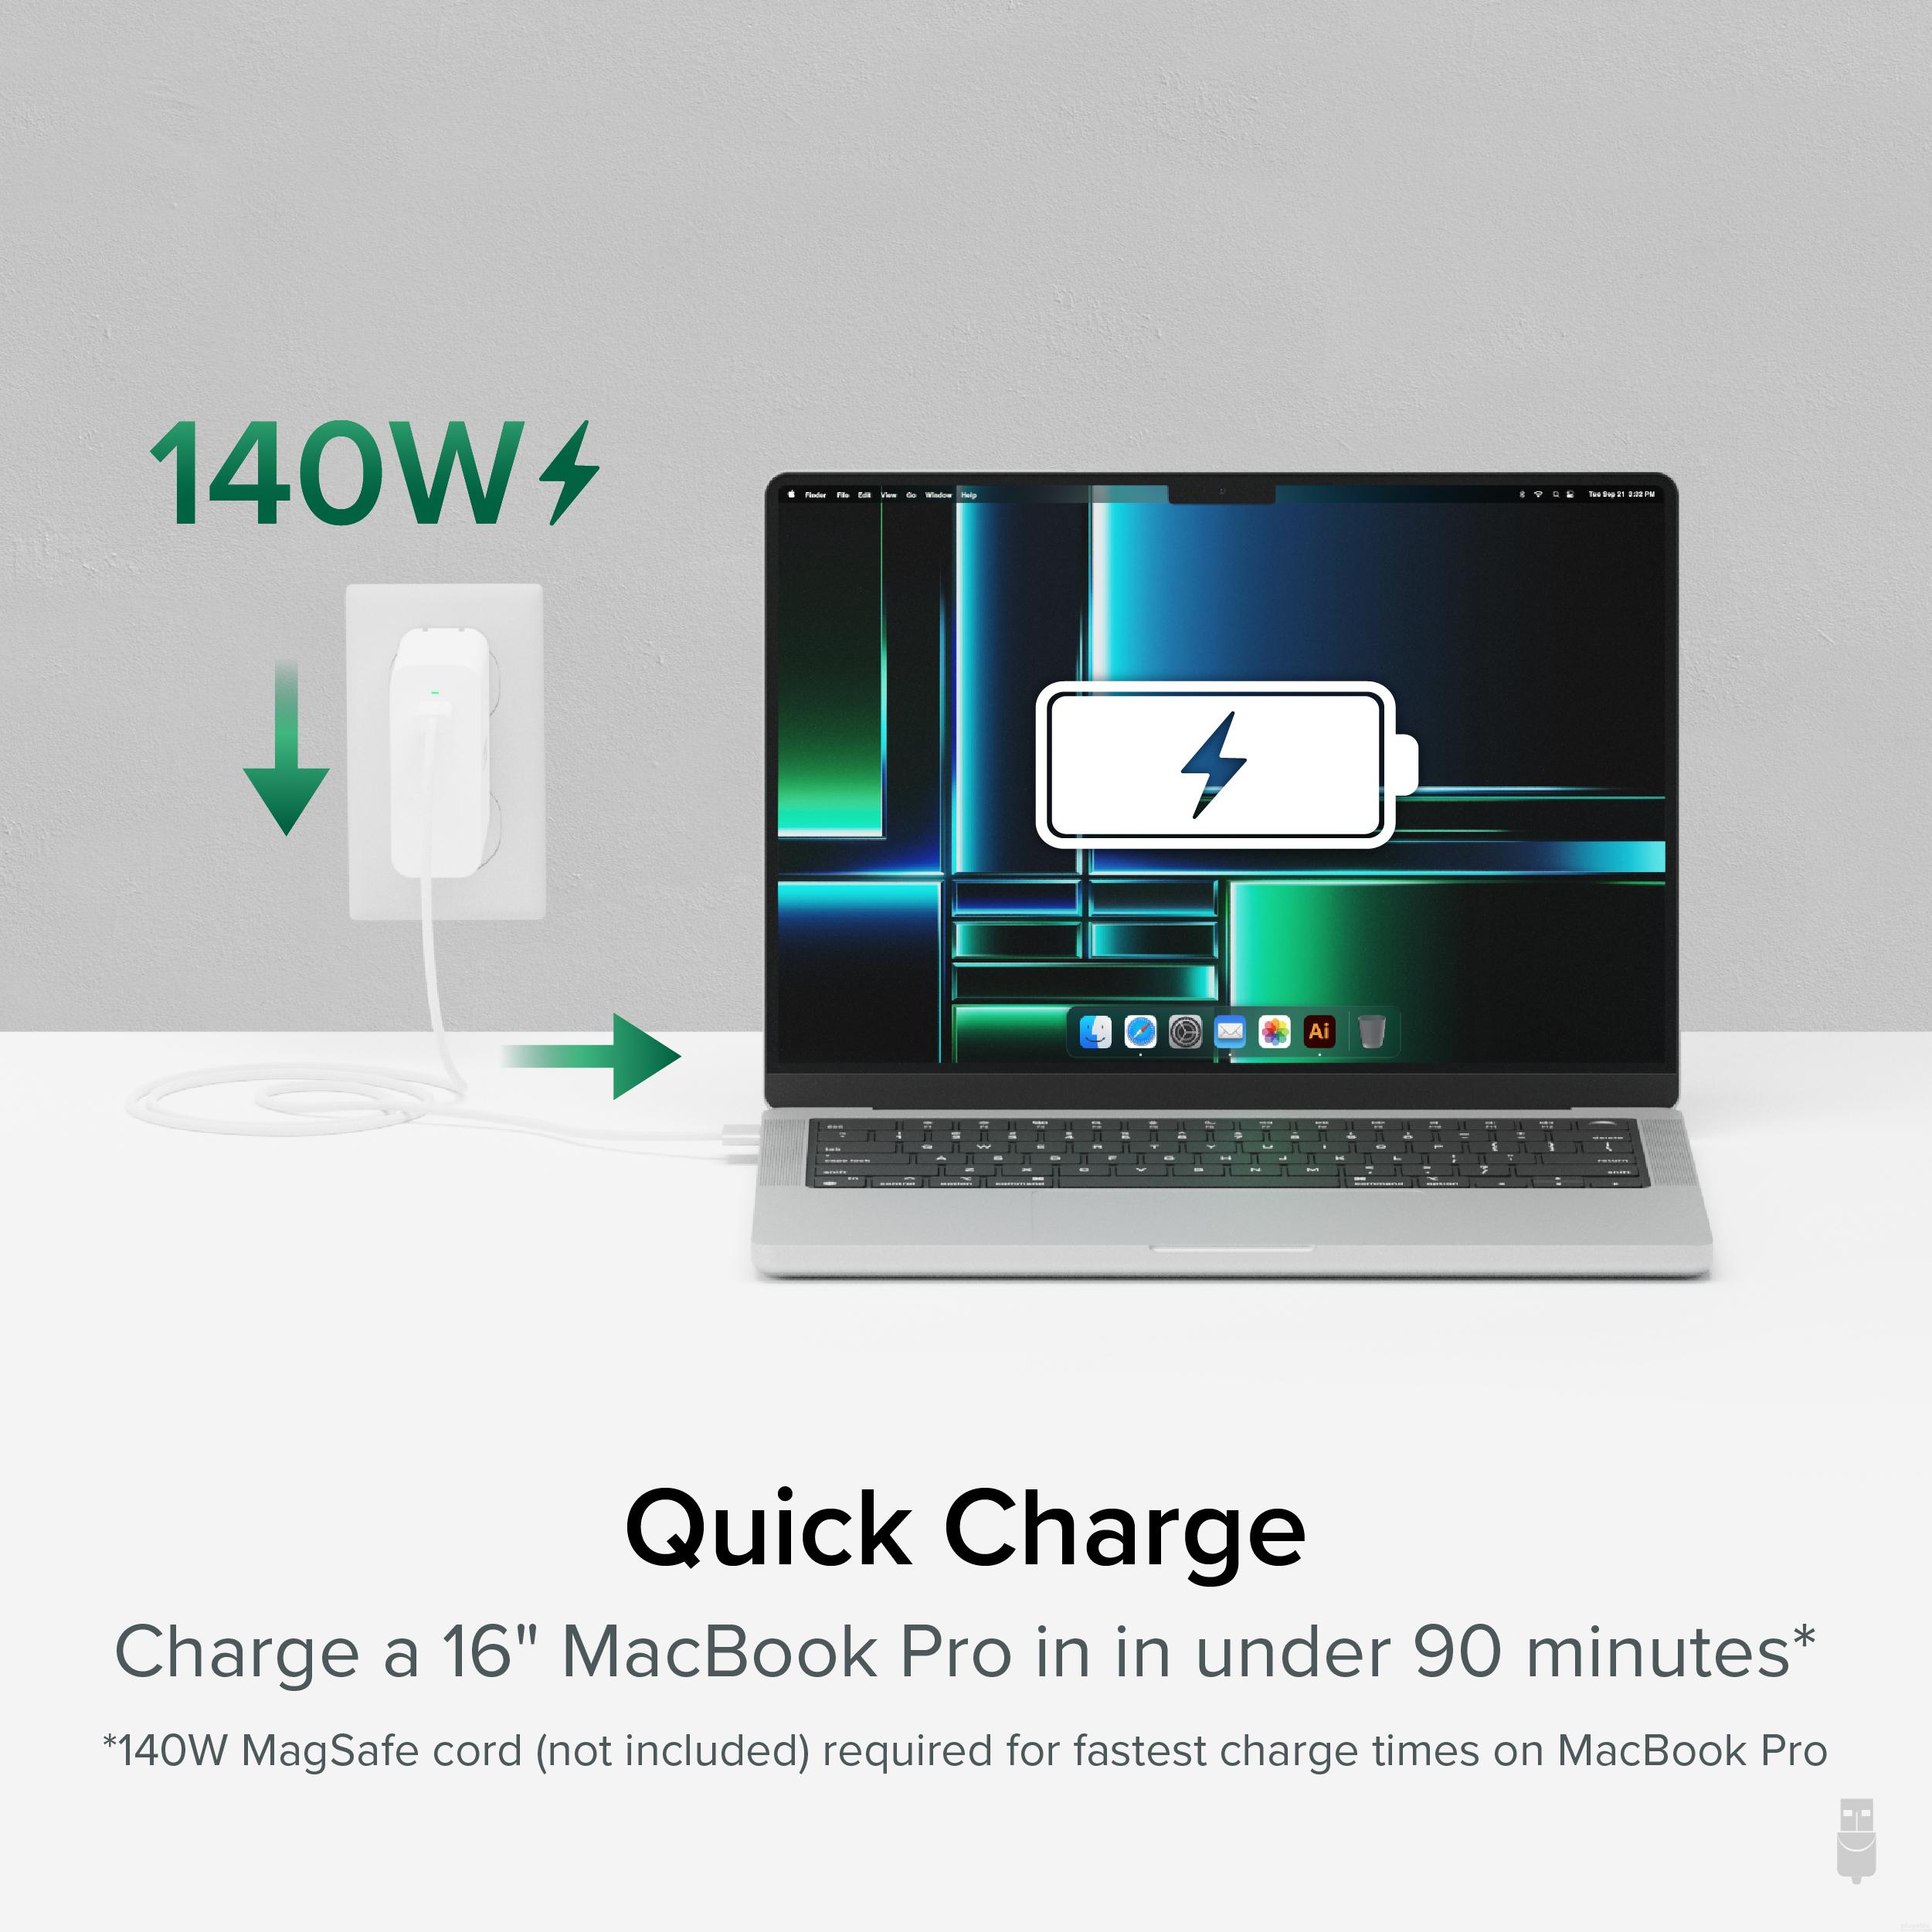 Plugable 140W USB C Charger, GaN Wall Charger for Laptop, PD 3.1 (EPR) Power Adapter is Compatible with USB-C MacBook Pro, Macbook Air iPad Pro, Surface and USB-C Devices, Compact and Portable Charger - image 3 of 10